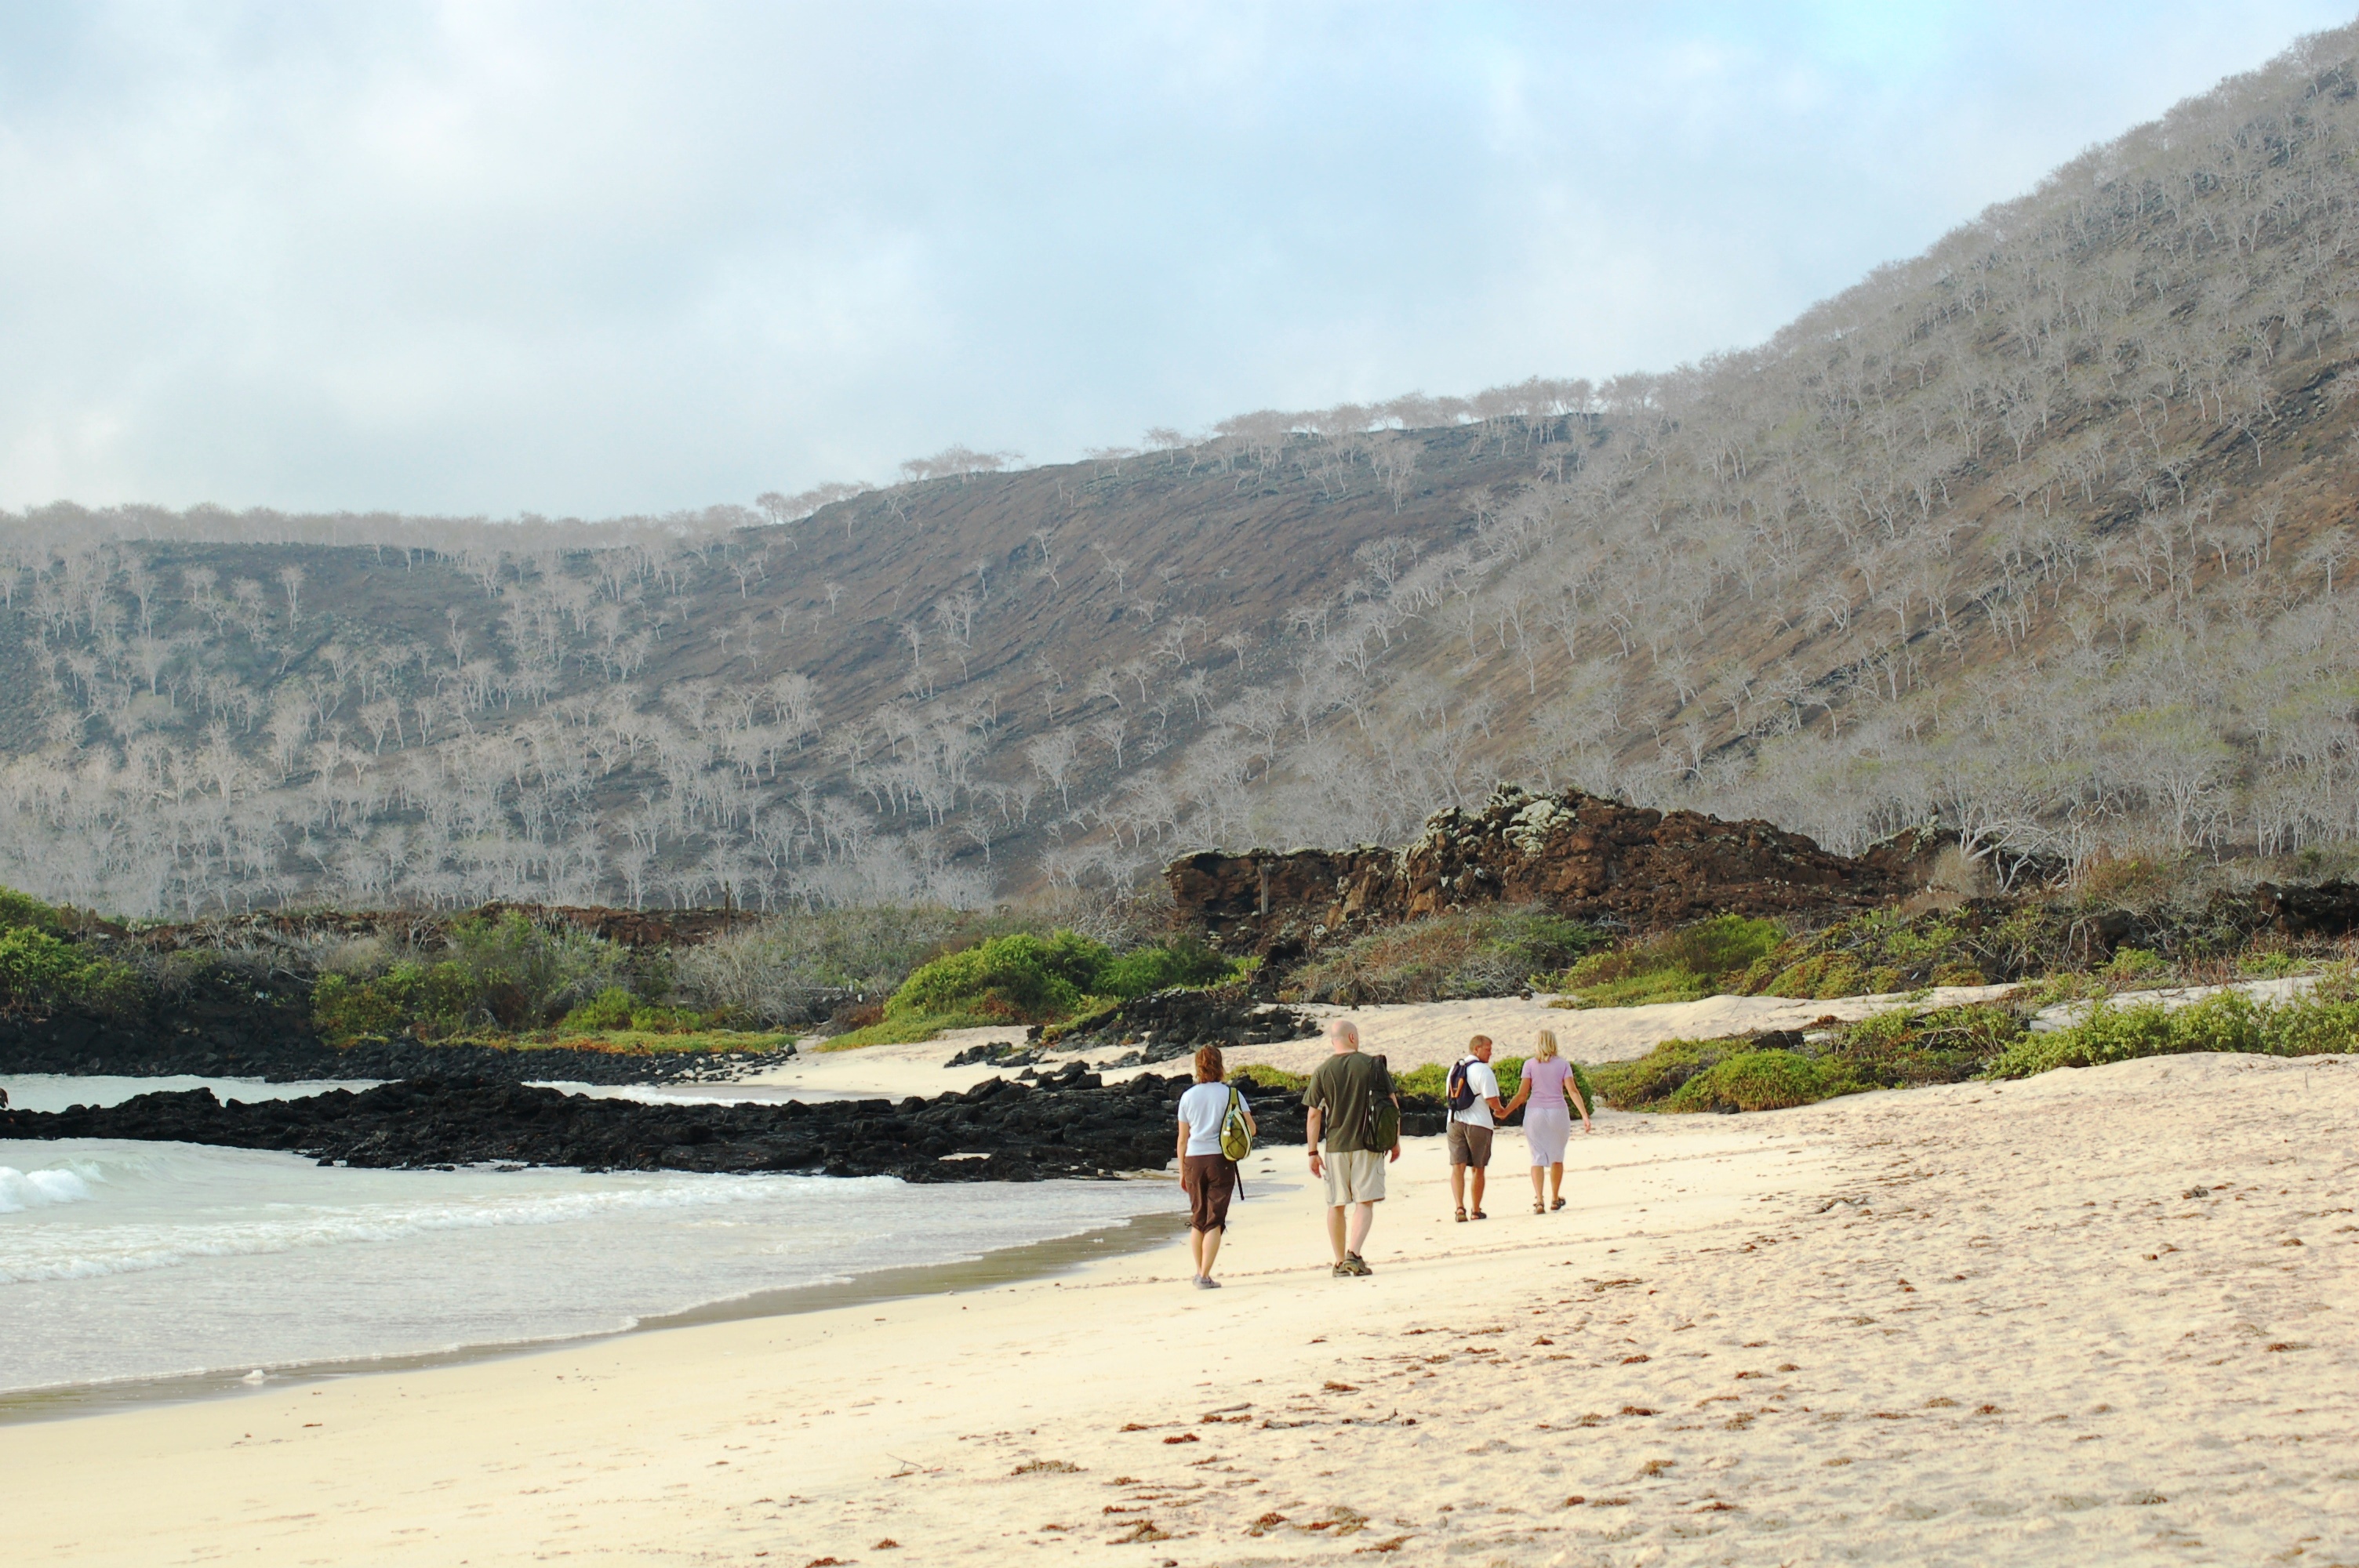 	Travel to Galapagos during Covid